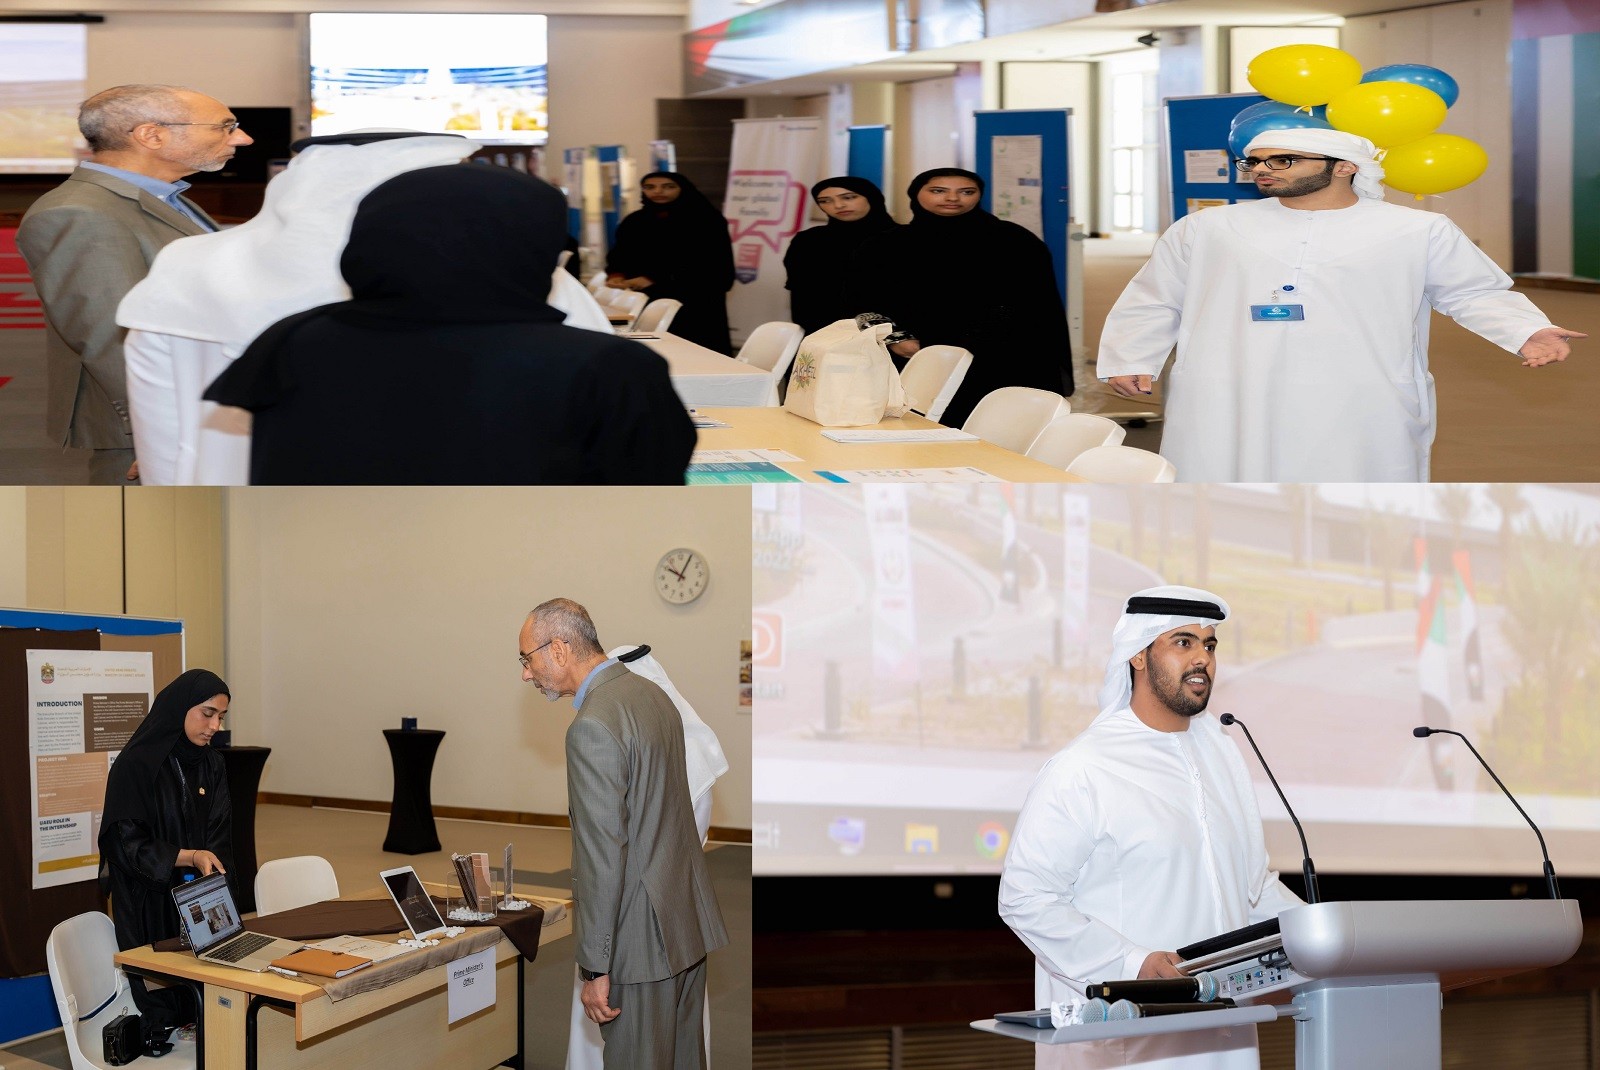 180 Students from College of Business and Economics at UAEU Present their Graduation Projects and Internship Programs